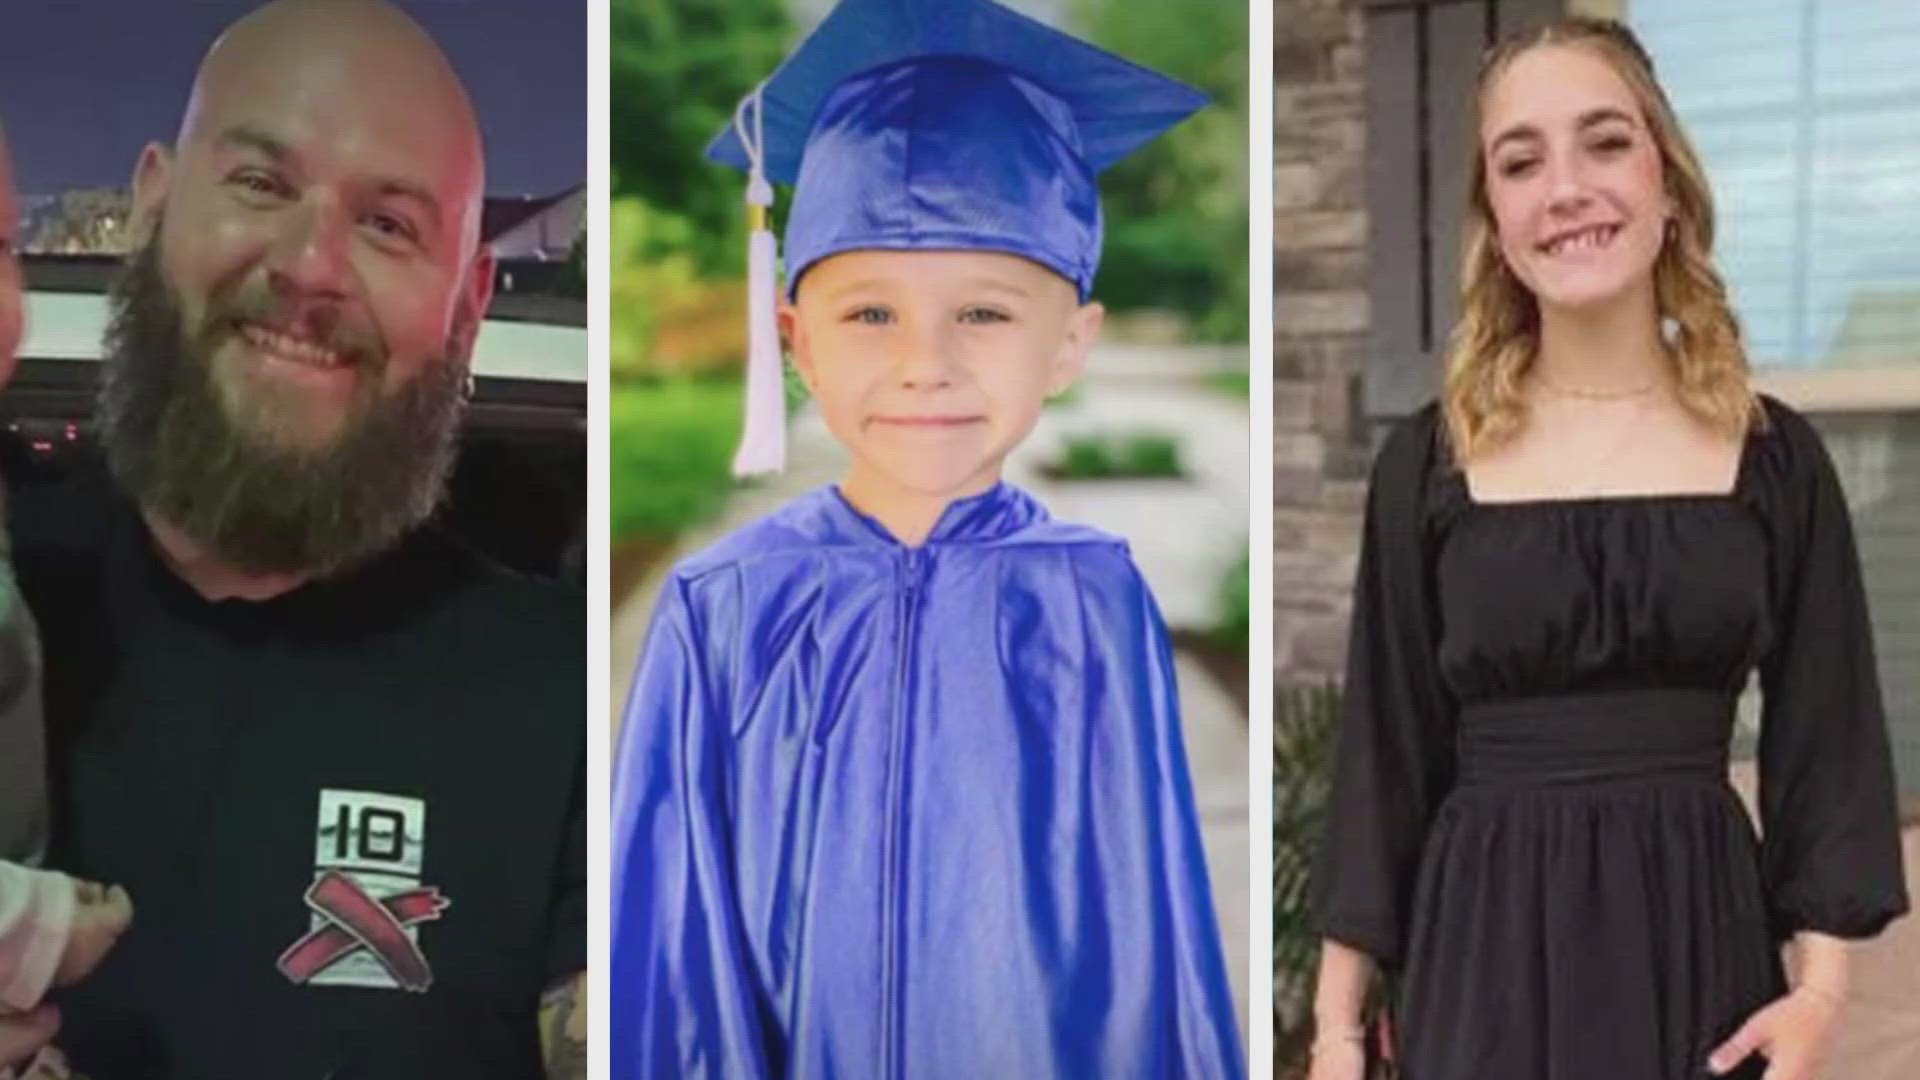 Tuesday marks one year since three people, including two kids, were killed in an alleged drunk driving crash in Statesville.